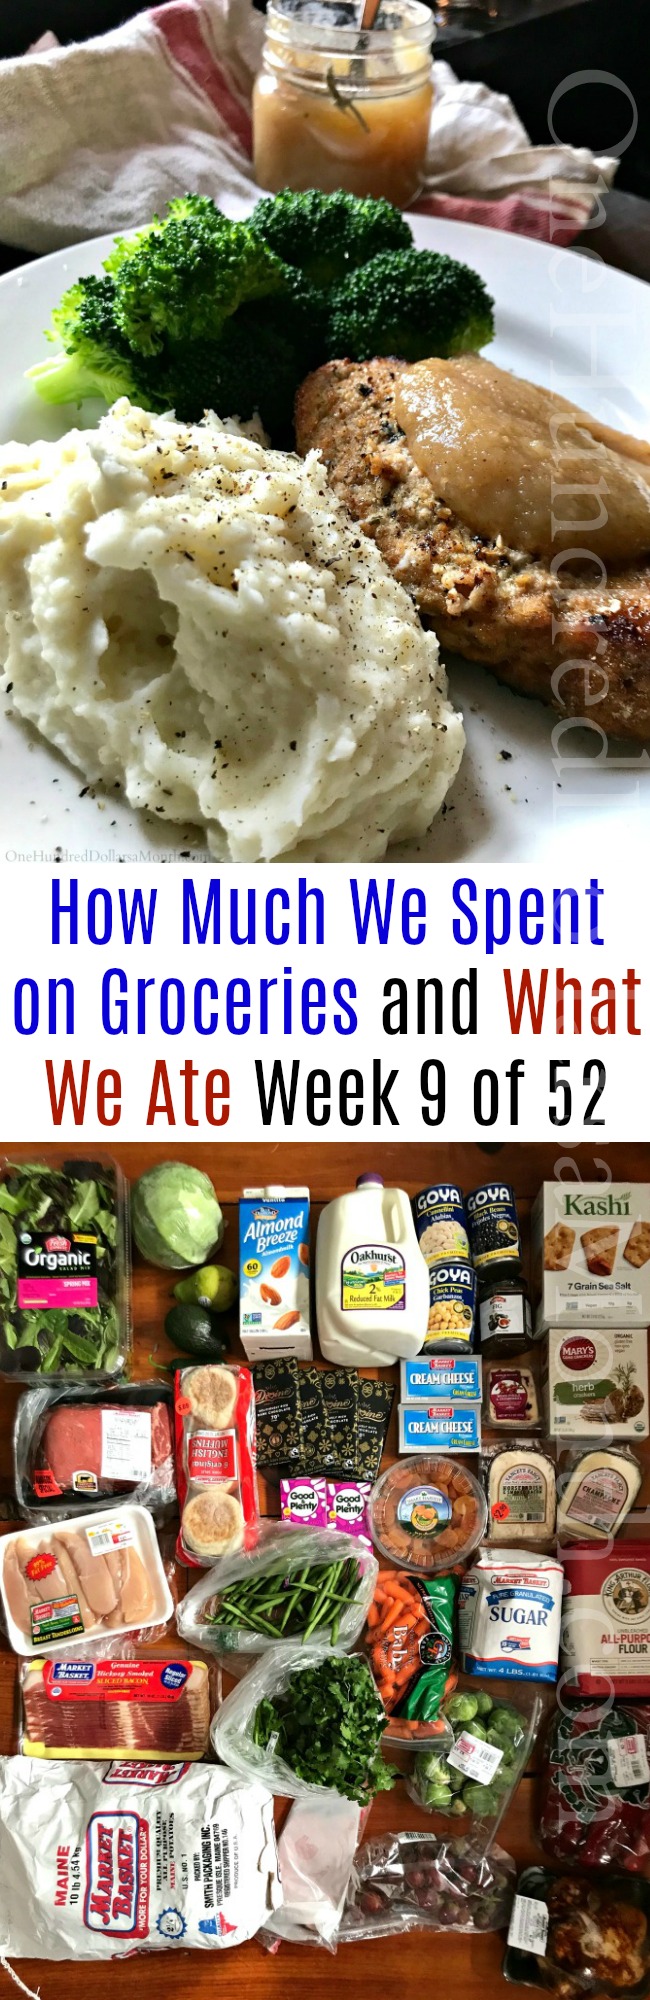 How Much We Spent on Groceries and What We Ate – Week 9 of 52